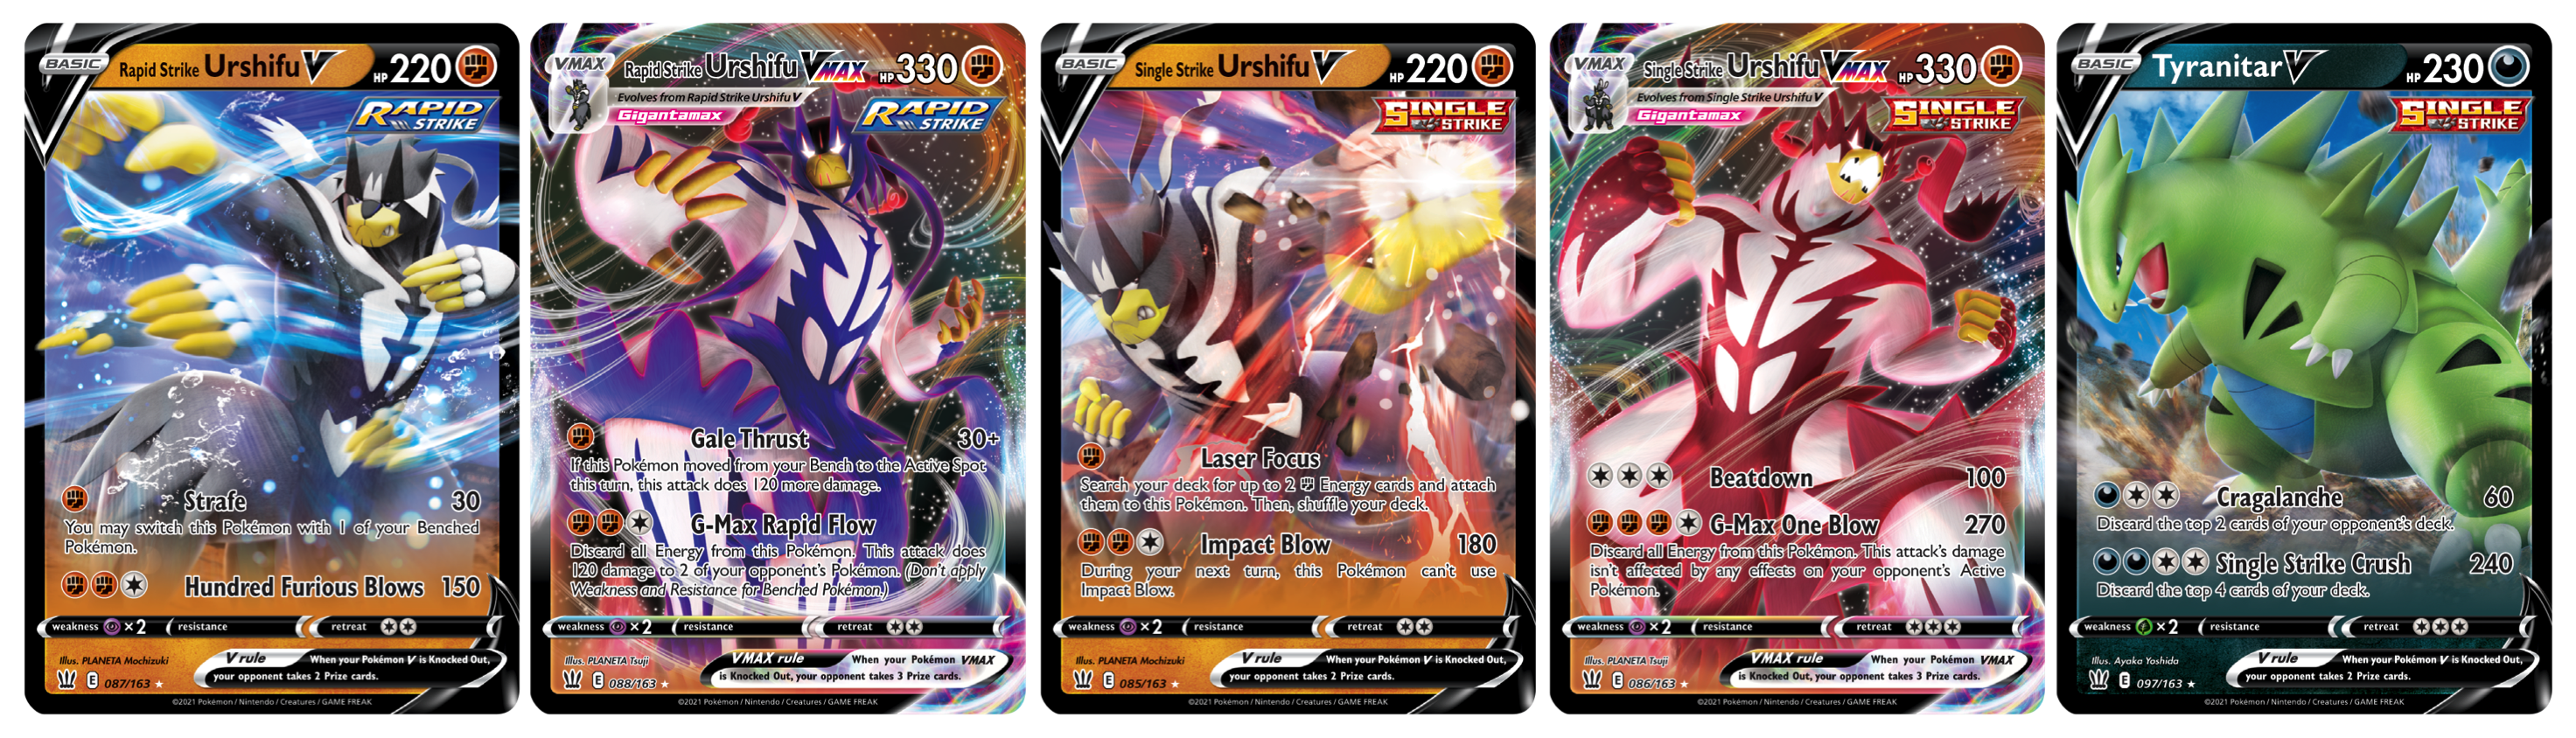 The Pokémon Trading Card Game Is Getting A Shake Up With New 'Battle